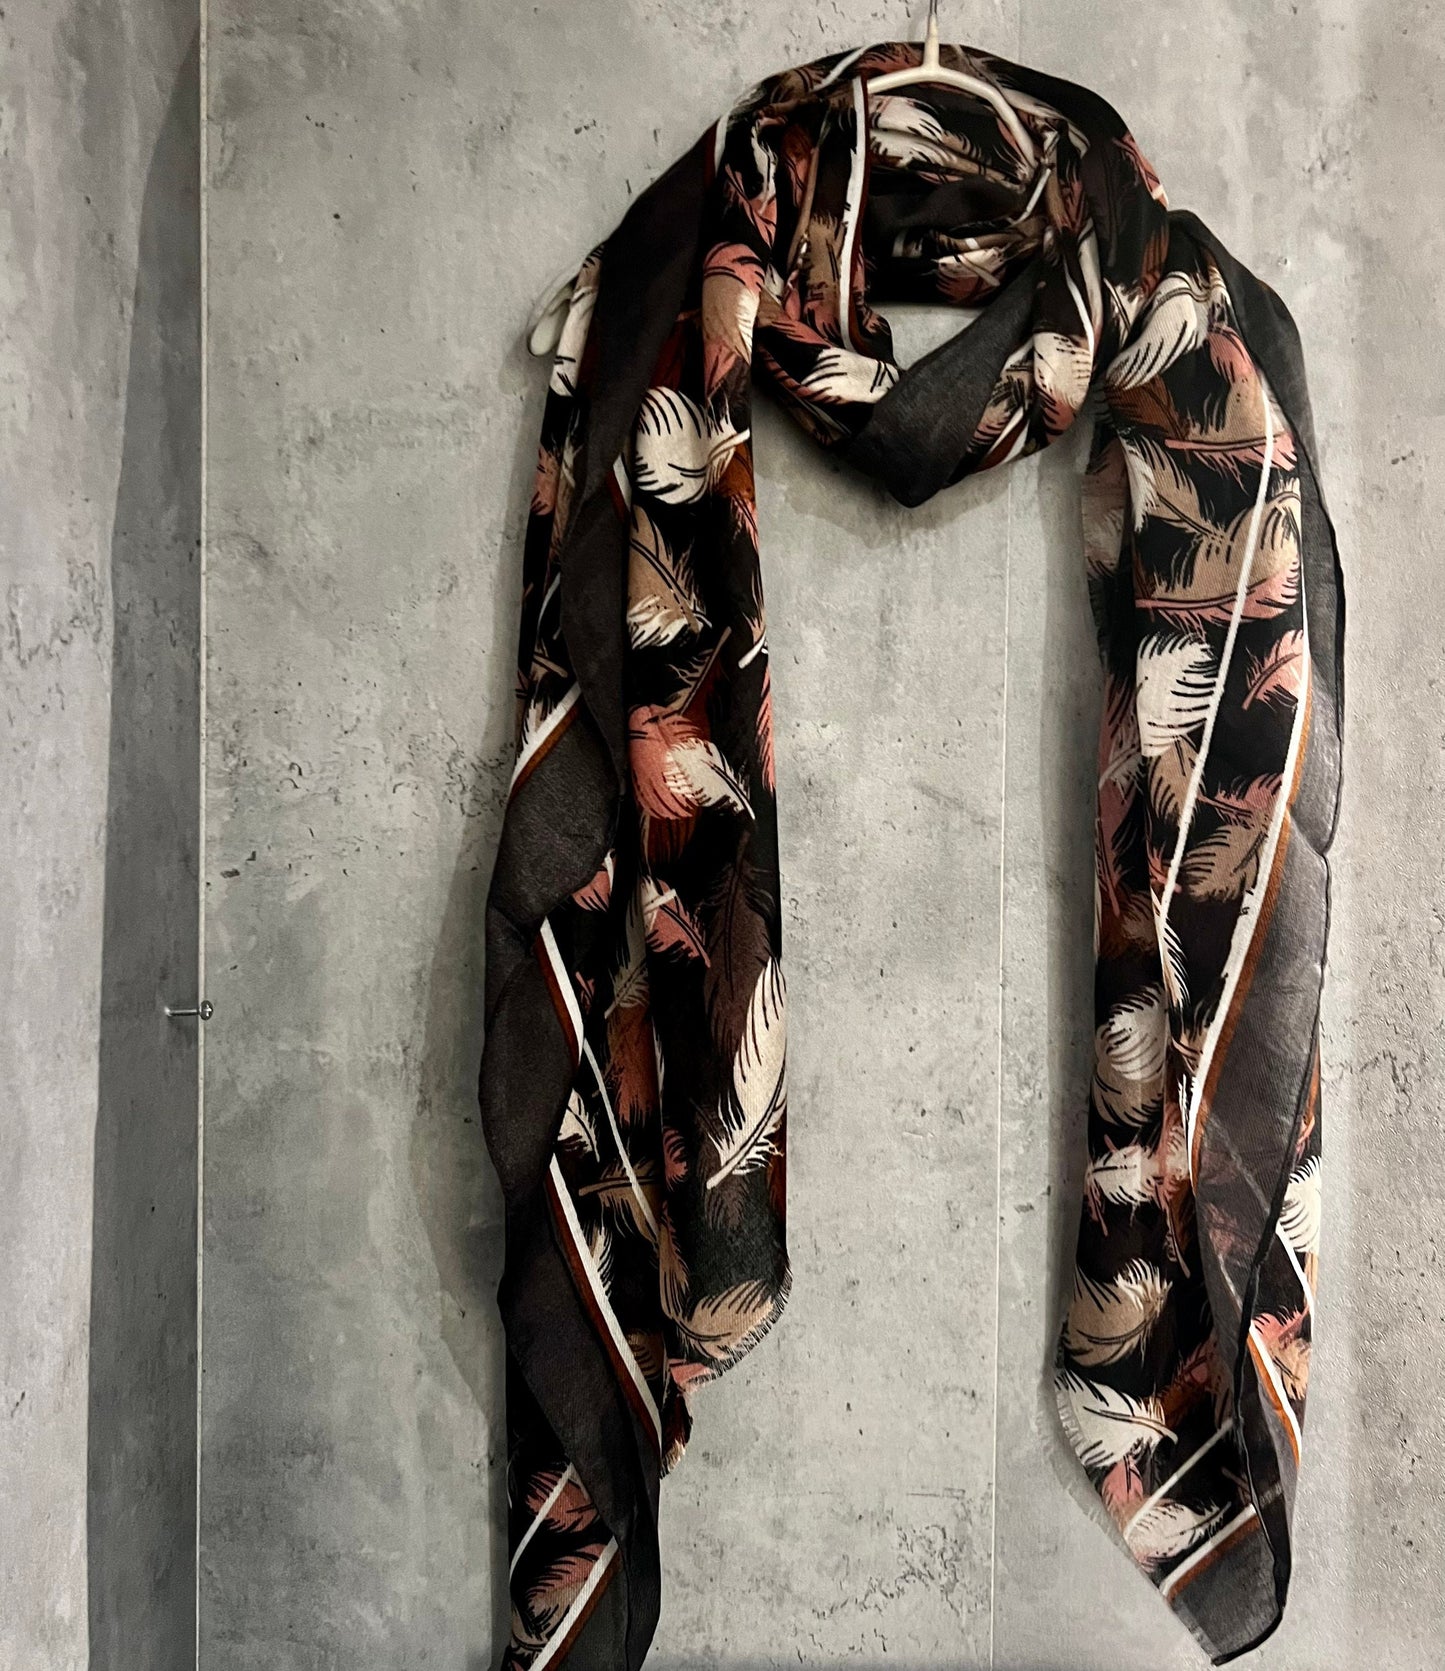 Grey Cotton Scarf with Floating Pink Beige Feathers – A Stylish and Versatile Gift for Her